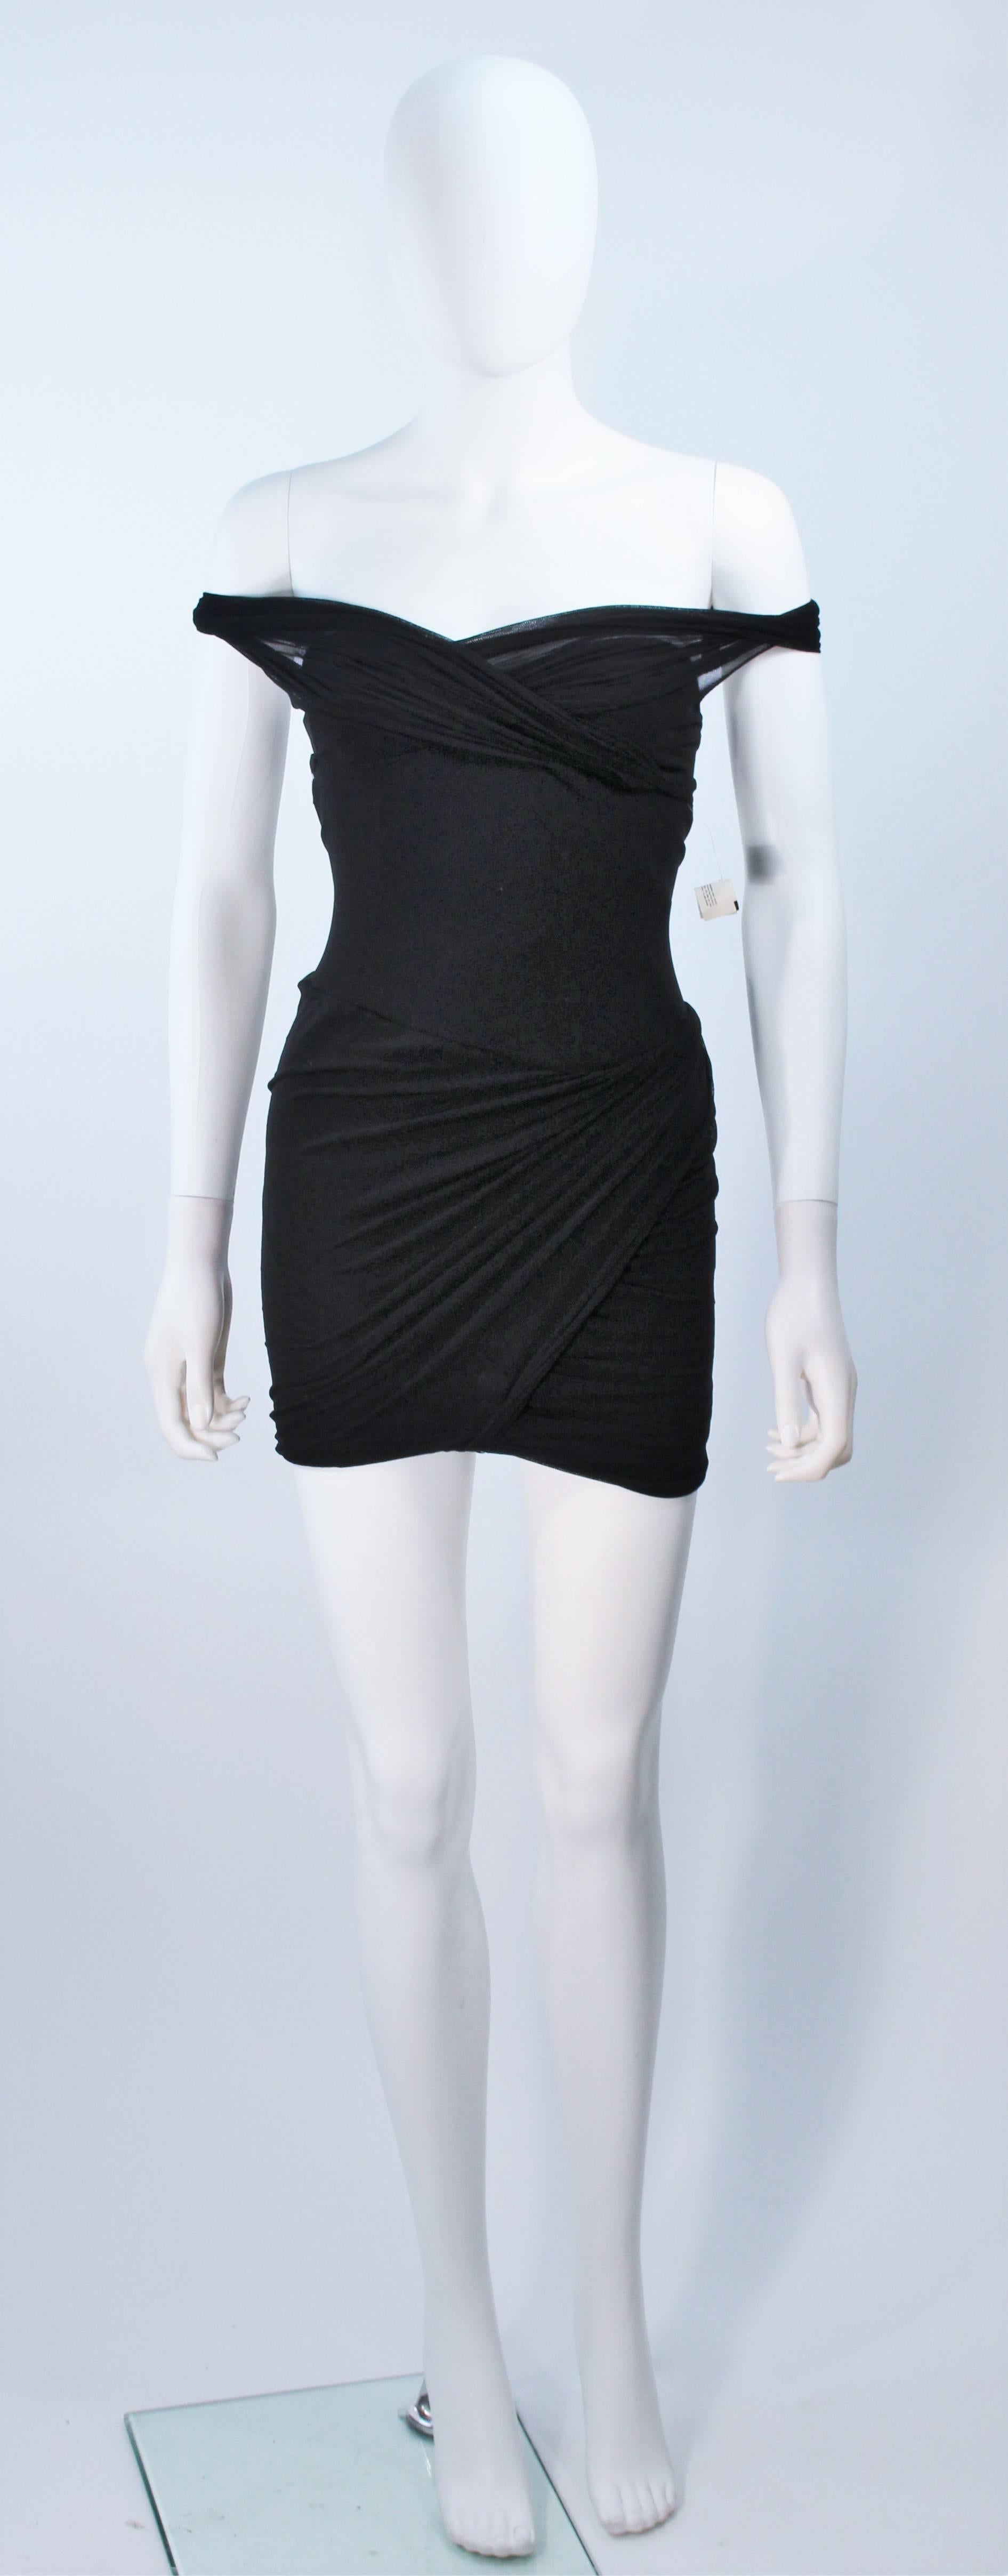  This Giorgio Saint Angelo  dress is composed of a black stretch jersey with mesh over lay in an off the shoulder style. Pull on style. In excellent vintage condition, with original tag. 

  **Please cross-reference measurements for personal